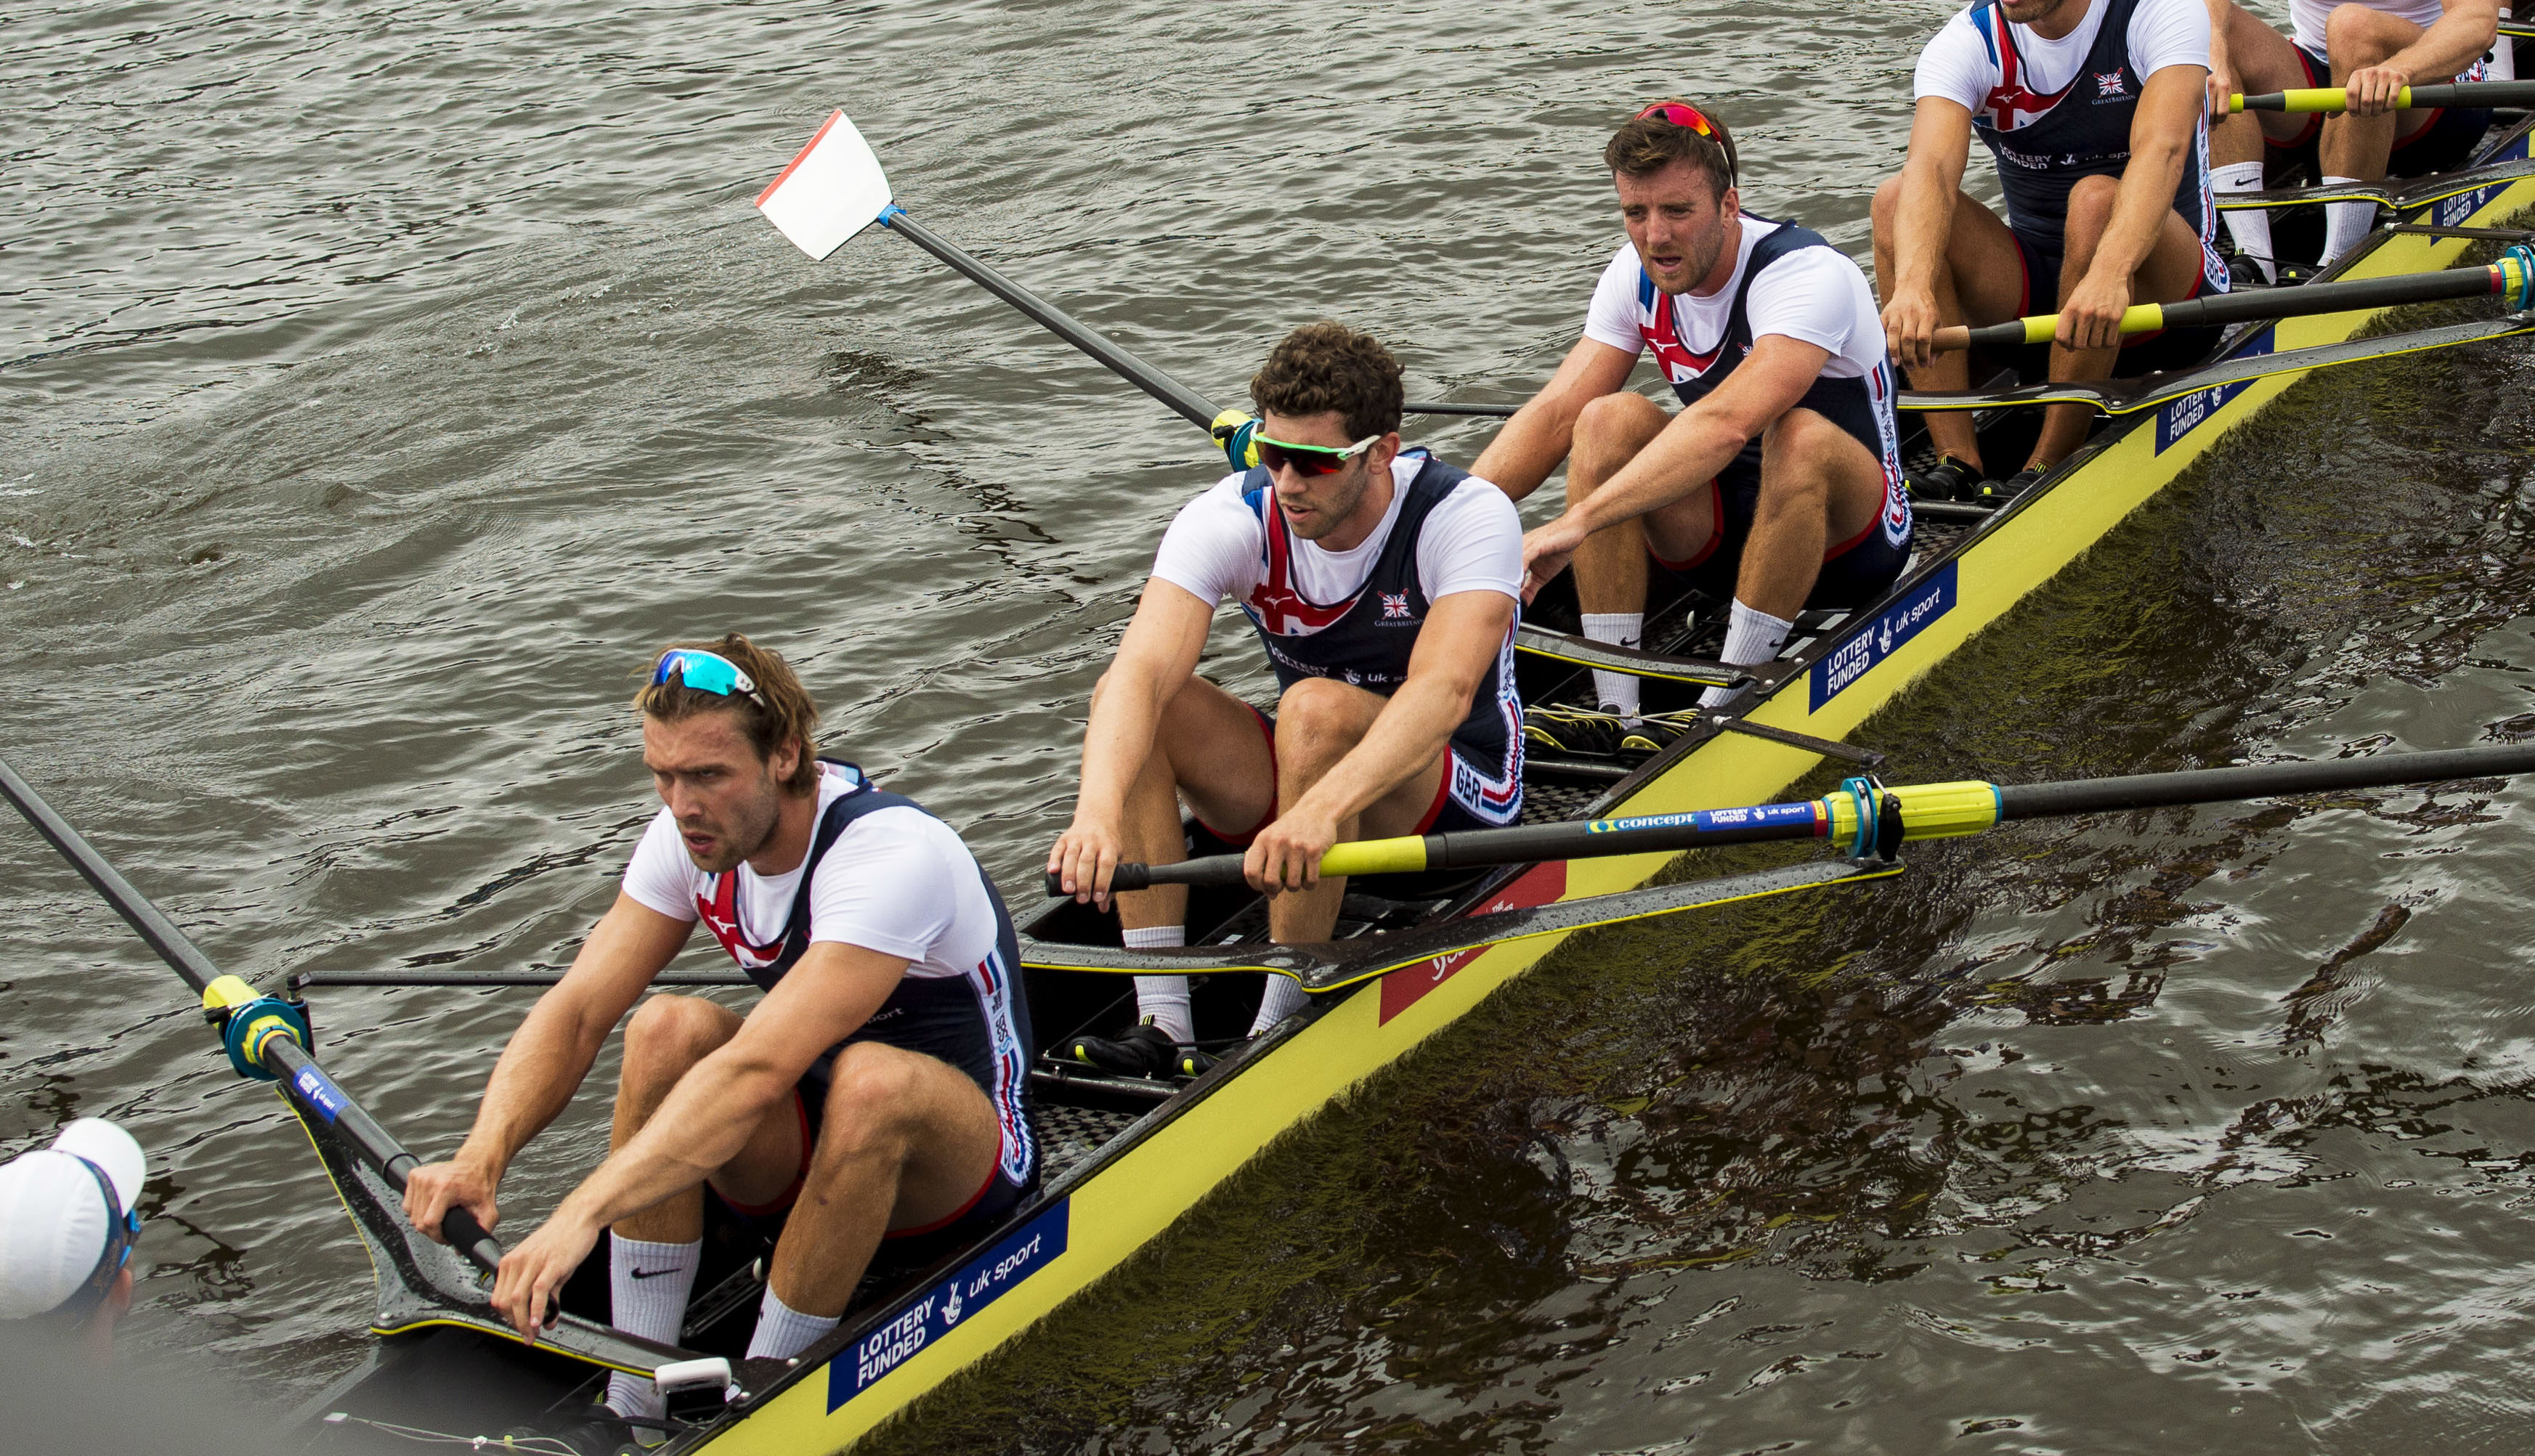 Left-to-right: Oliver Wynne-Griffith, Matthew Tarrant and Alan Sinclair compete in the men's eight at the European Championships in Glasgow.